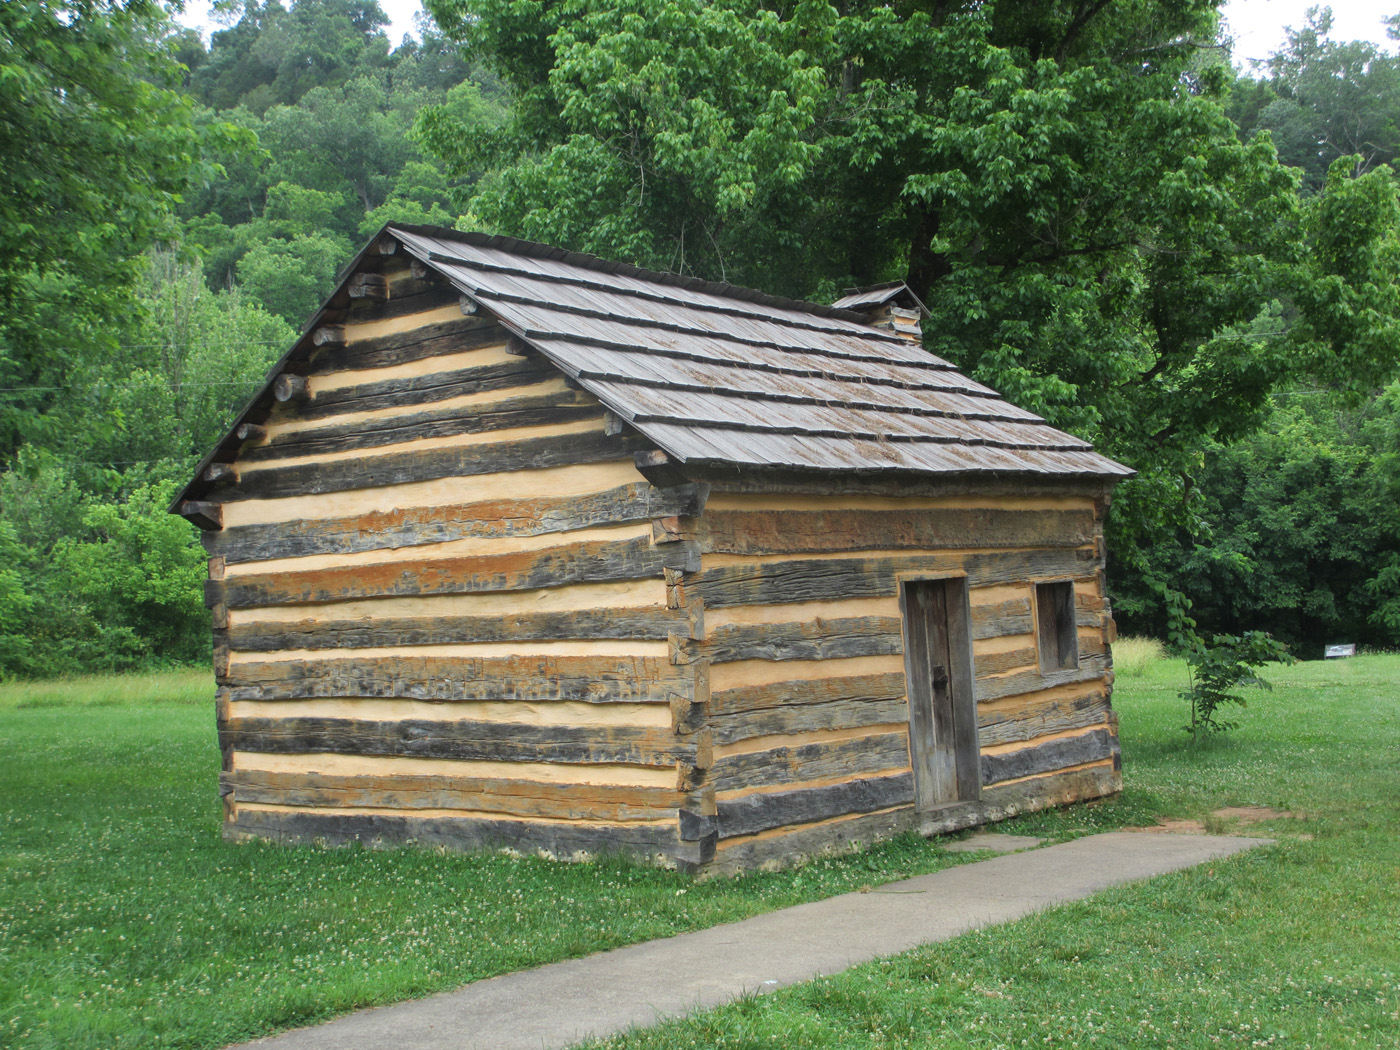 Abraham Lincoln Birthplace National Historical Park